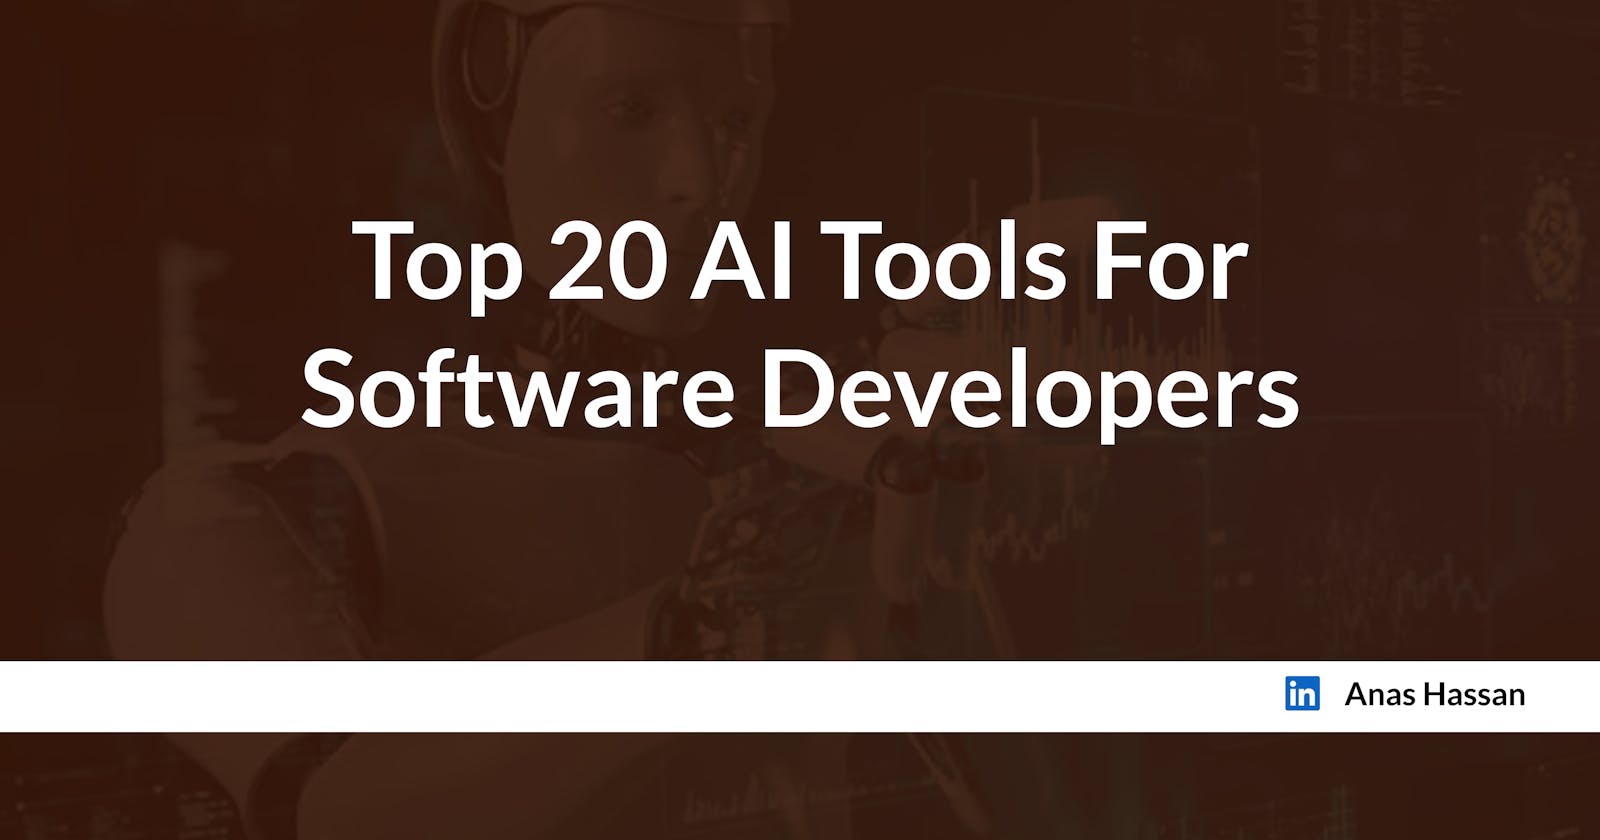 Top 20 AI Tools For Software Developers